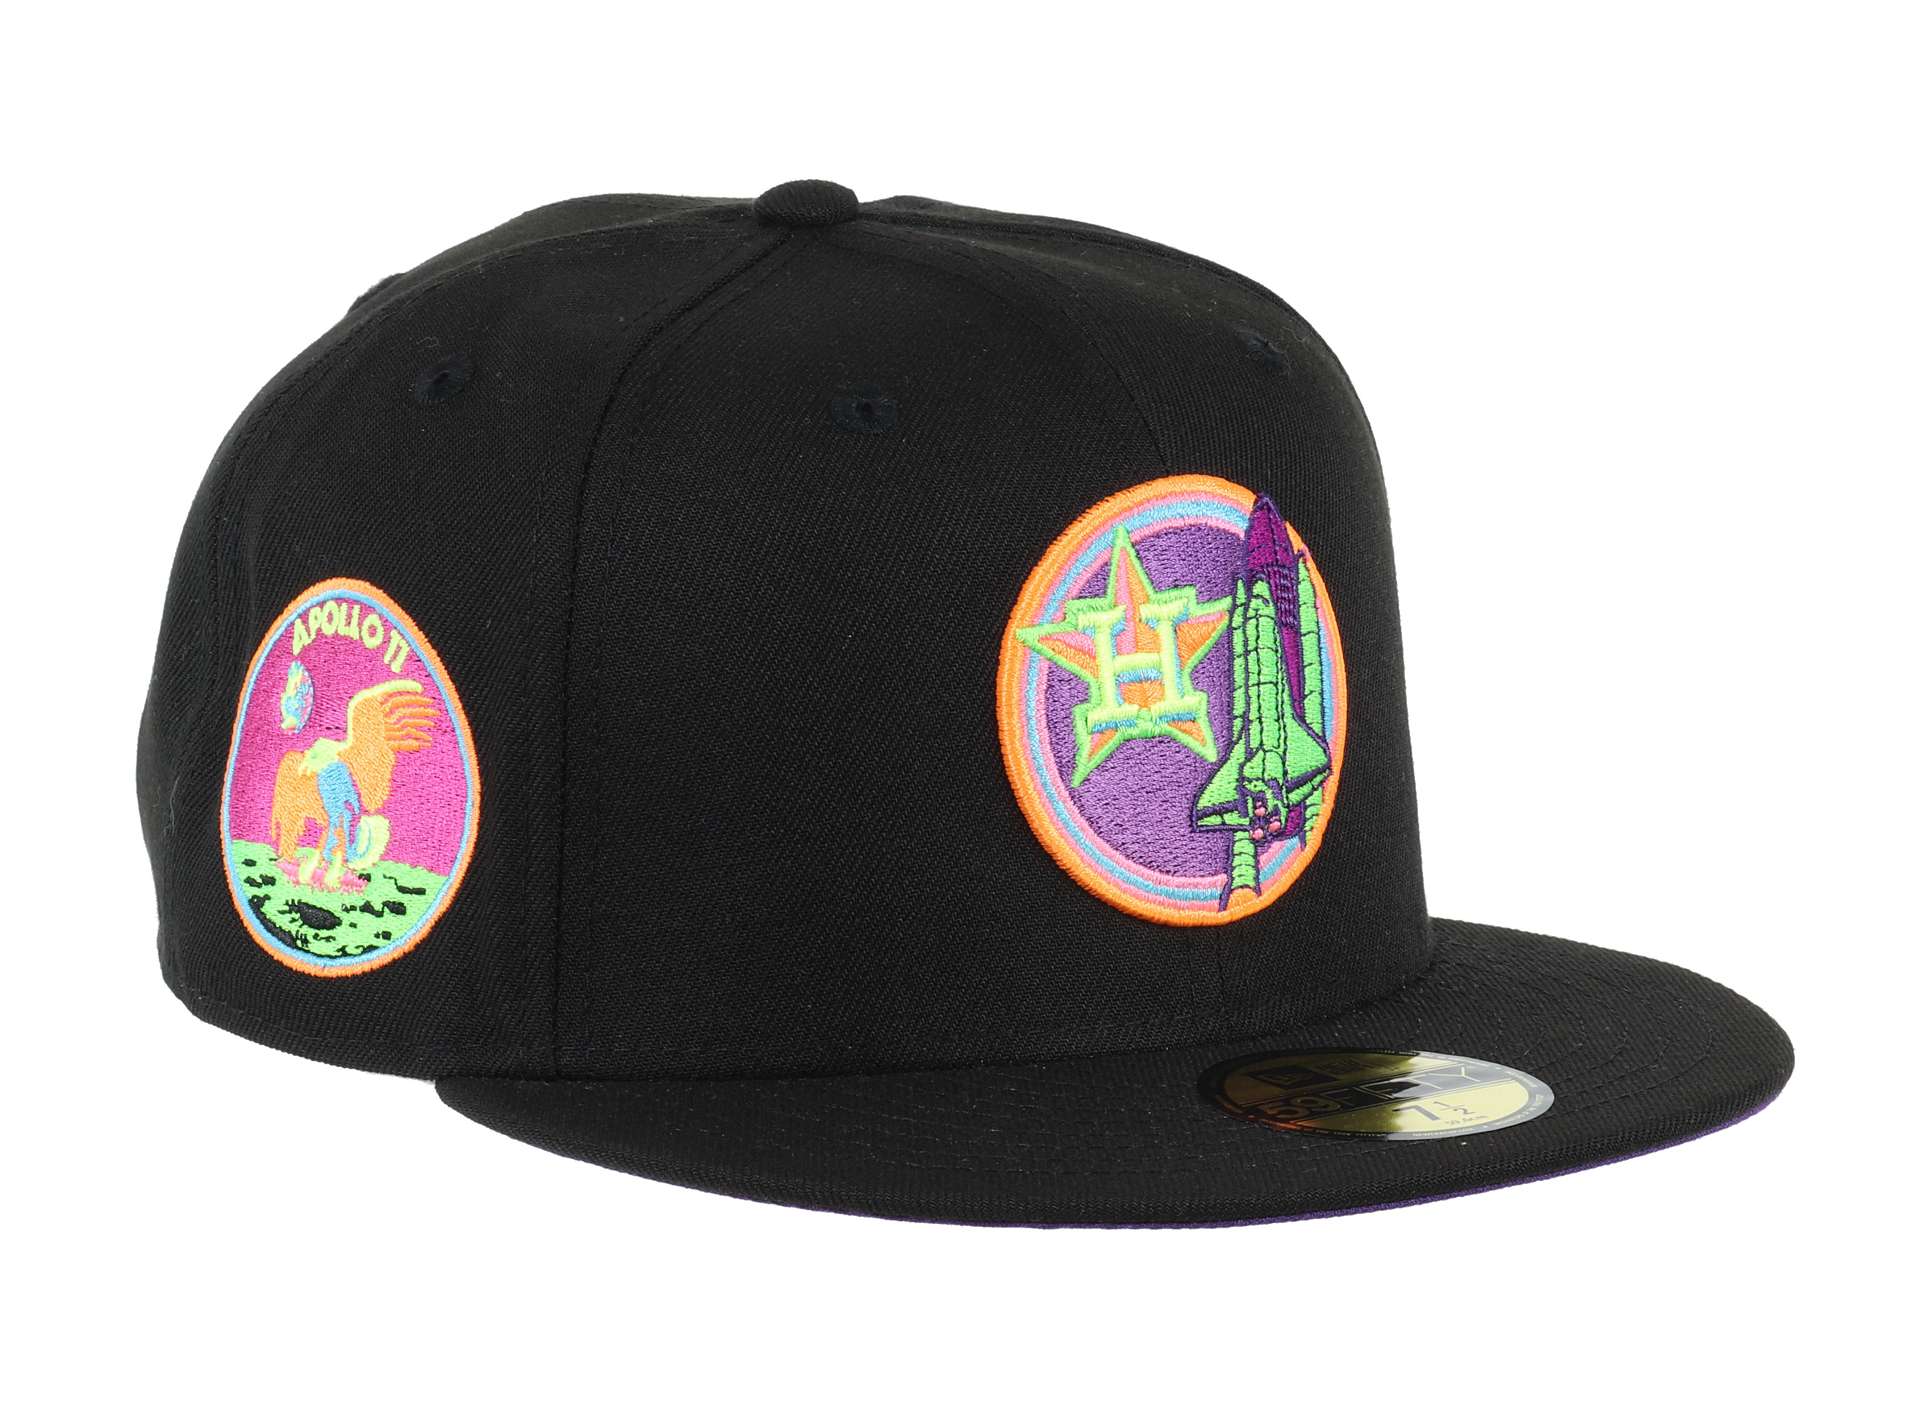 Houston Astros MLB Cooperstown Shuttle Apollo 11 Rocket Sidepatch Black 59Fifty Basecap New Era